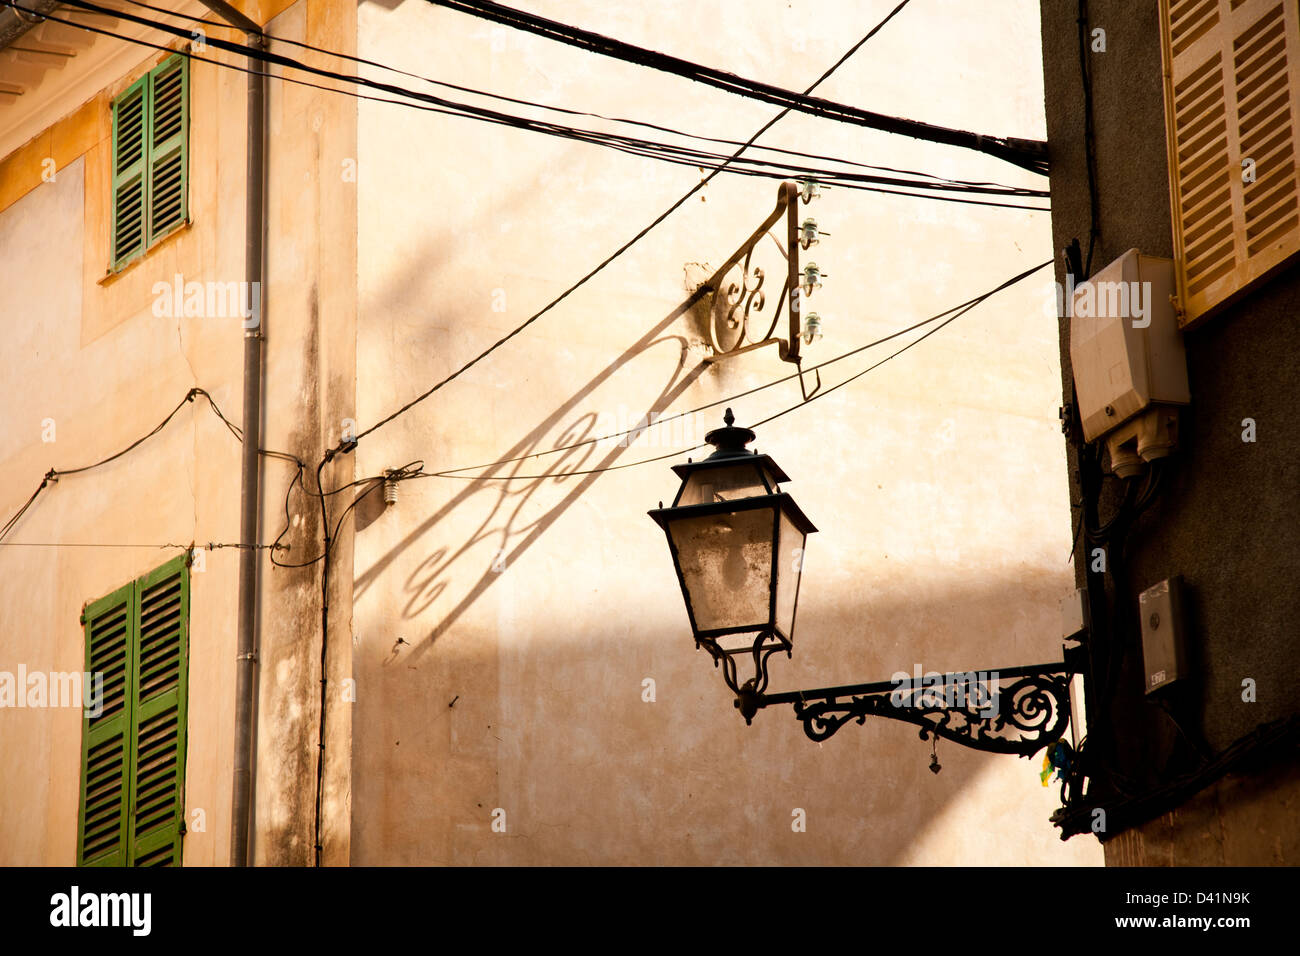 Close-up of buildings in Valldemossa, Majorca, Spain with an ornate street lamp and house with green shutters. Stock Photo